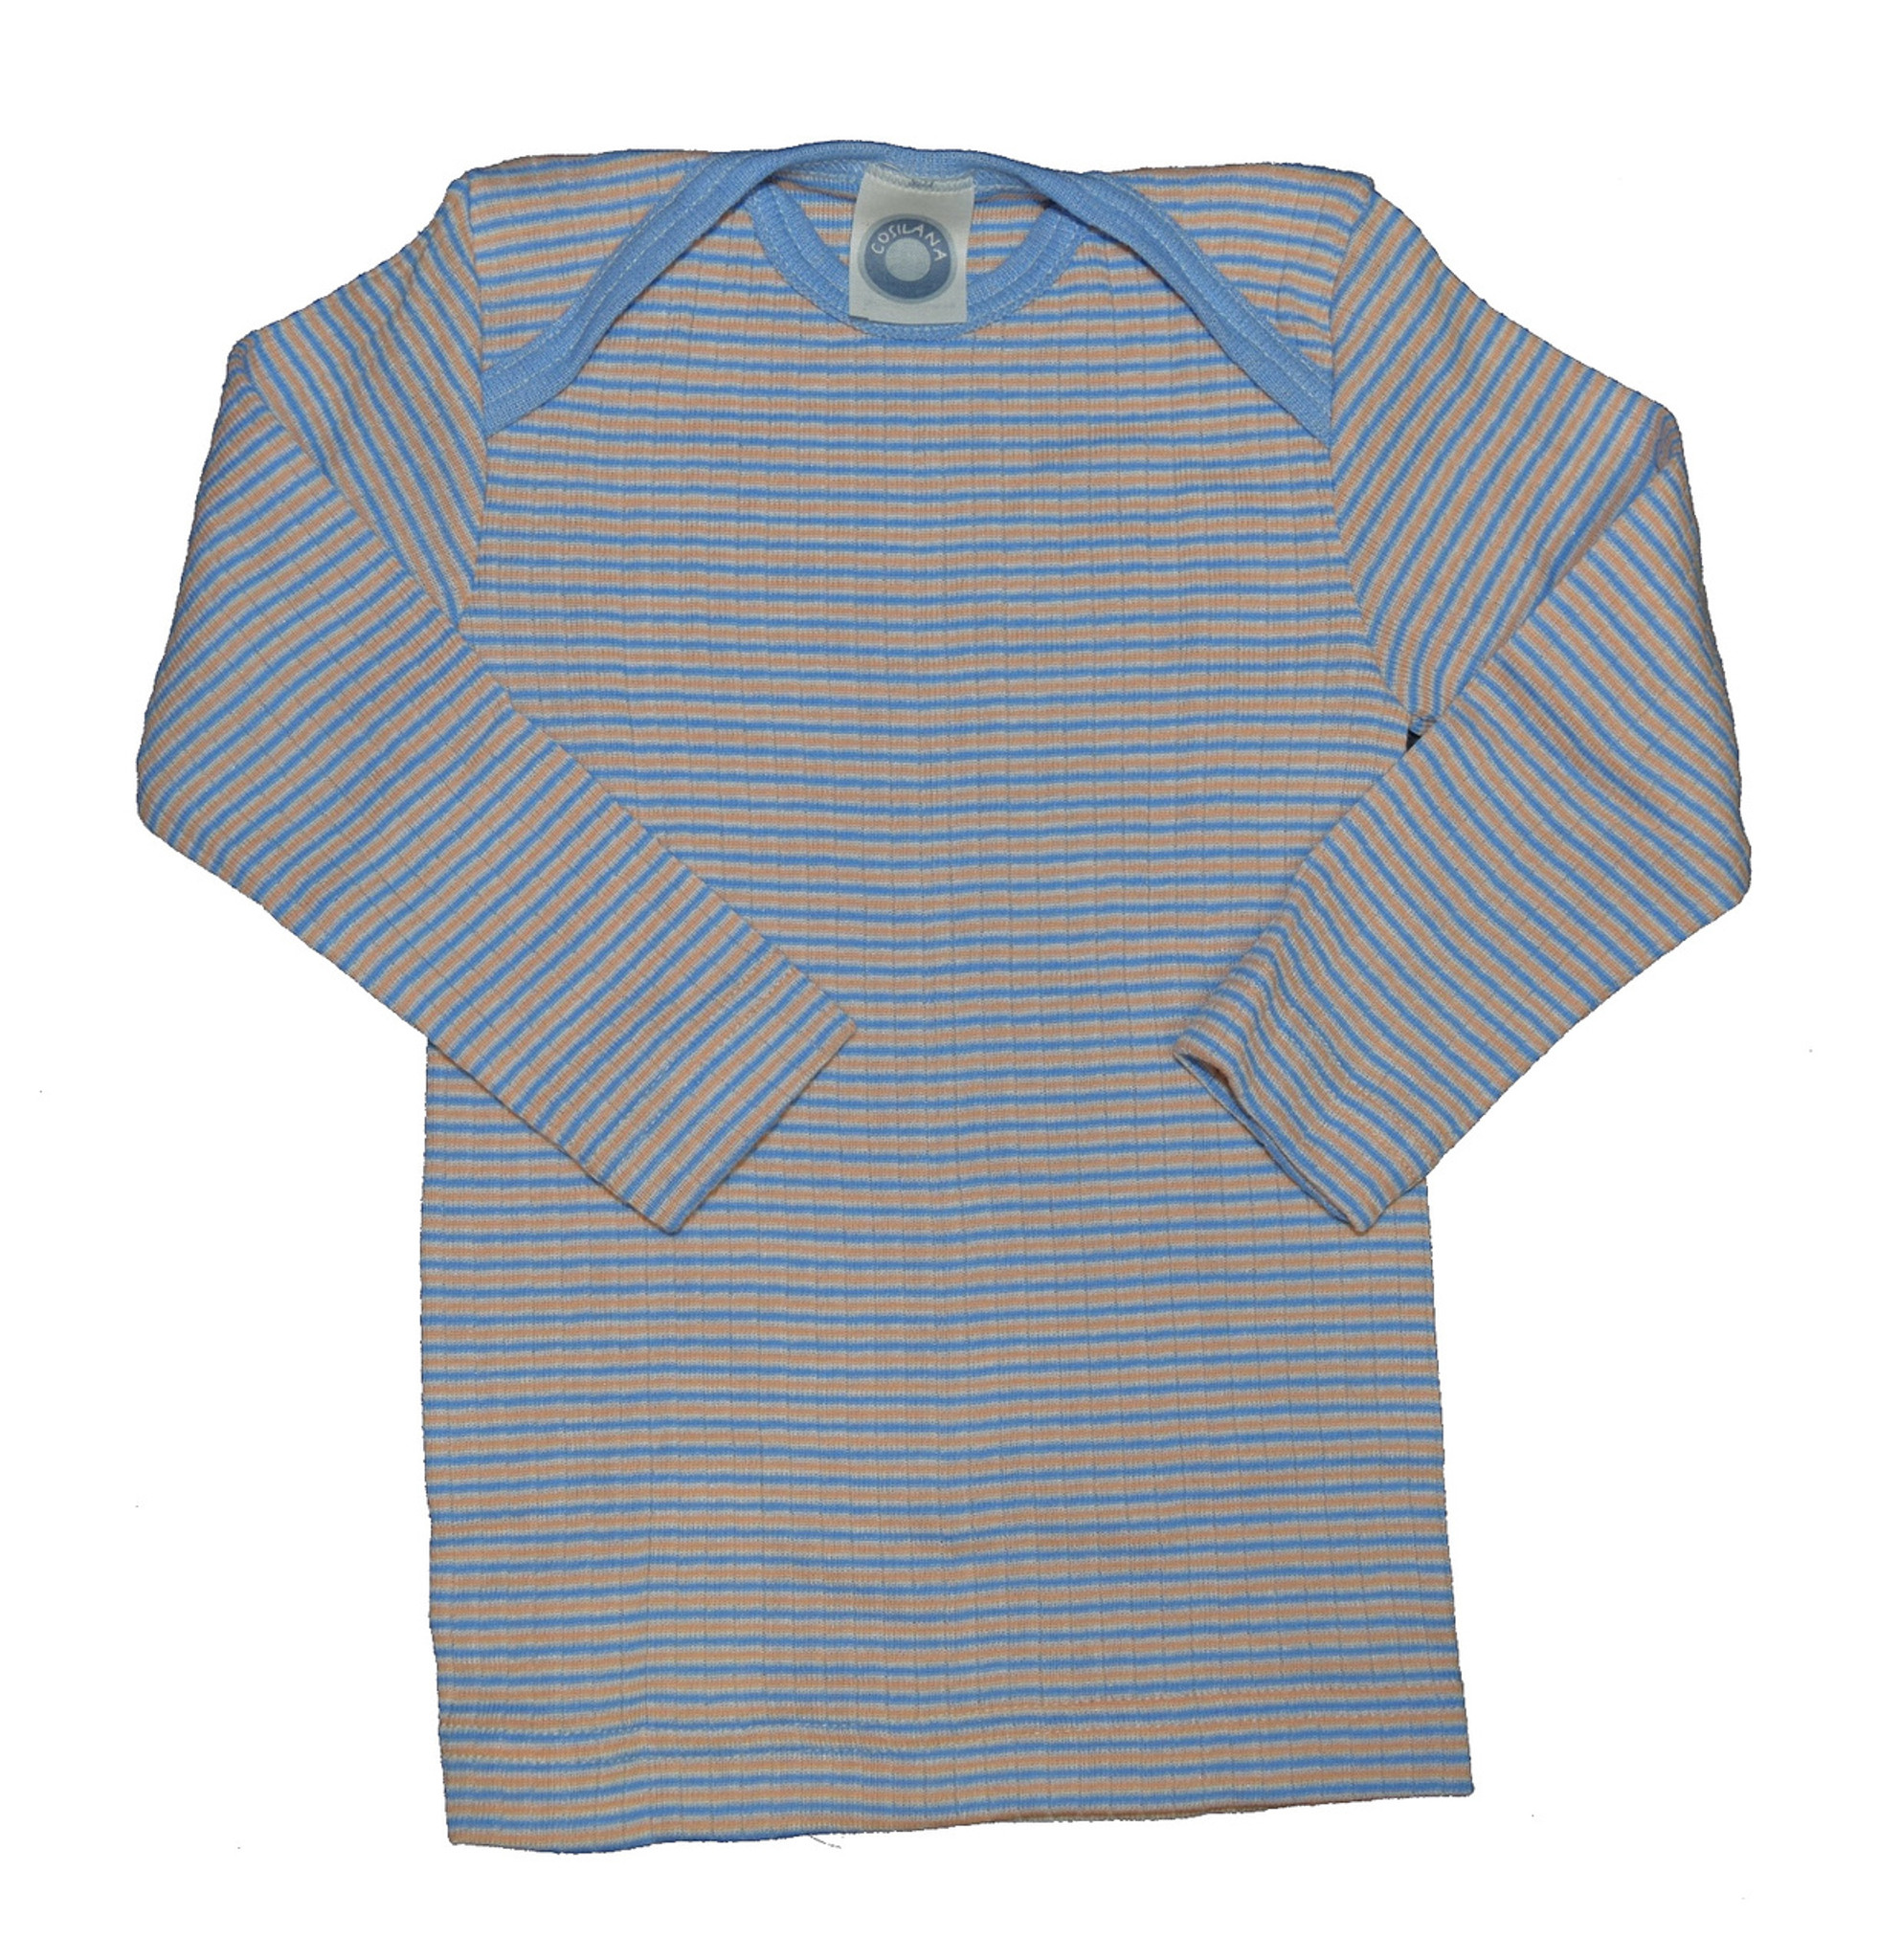 Organic Cotton size 3T Boy's Thermal Sleeved Long Sleeve Shirt 